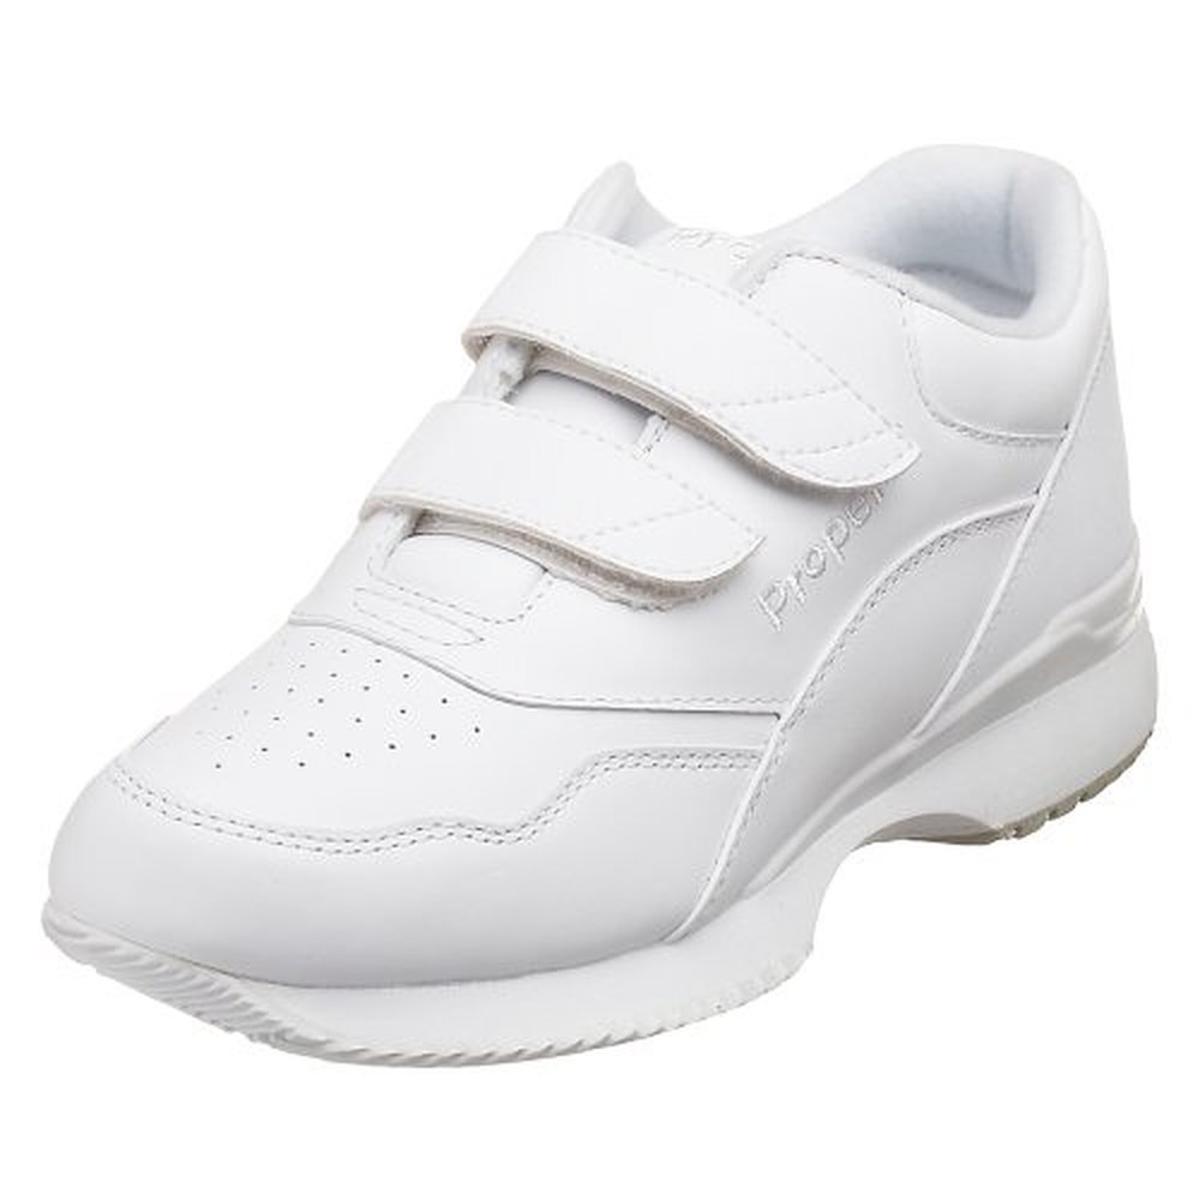 Propet Tour Walker Strap Womens Leather Trainers Walking Shoes